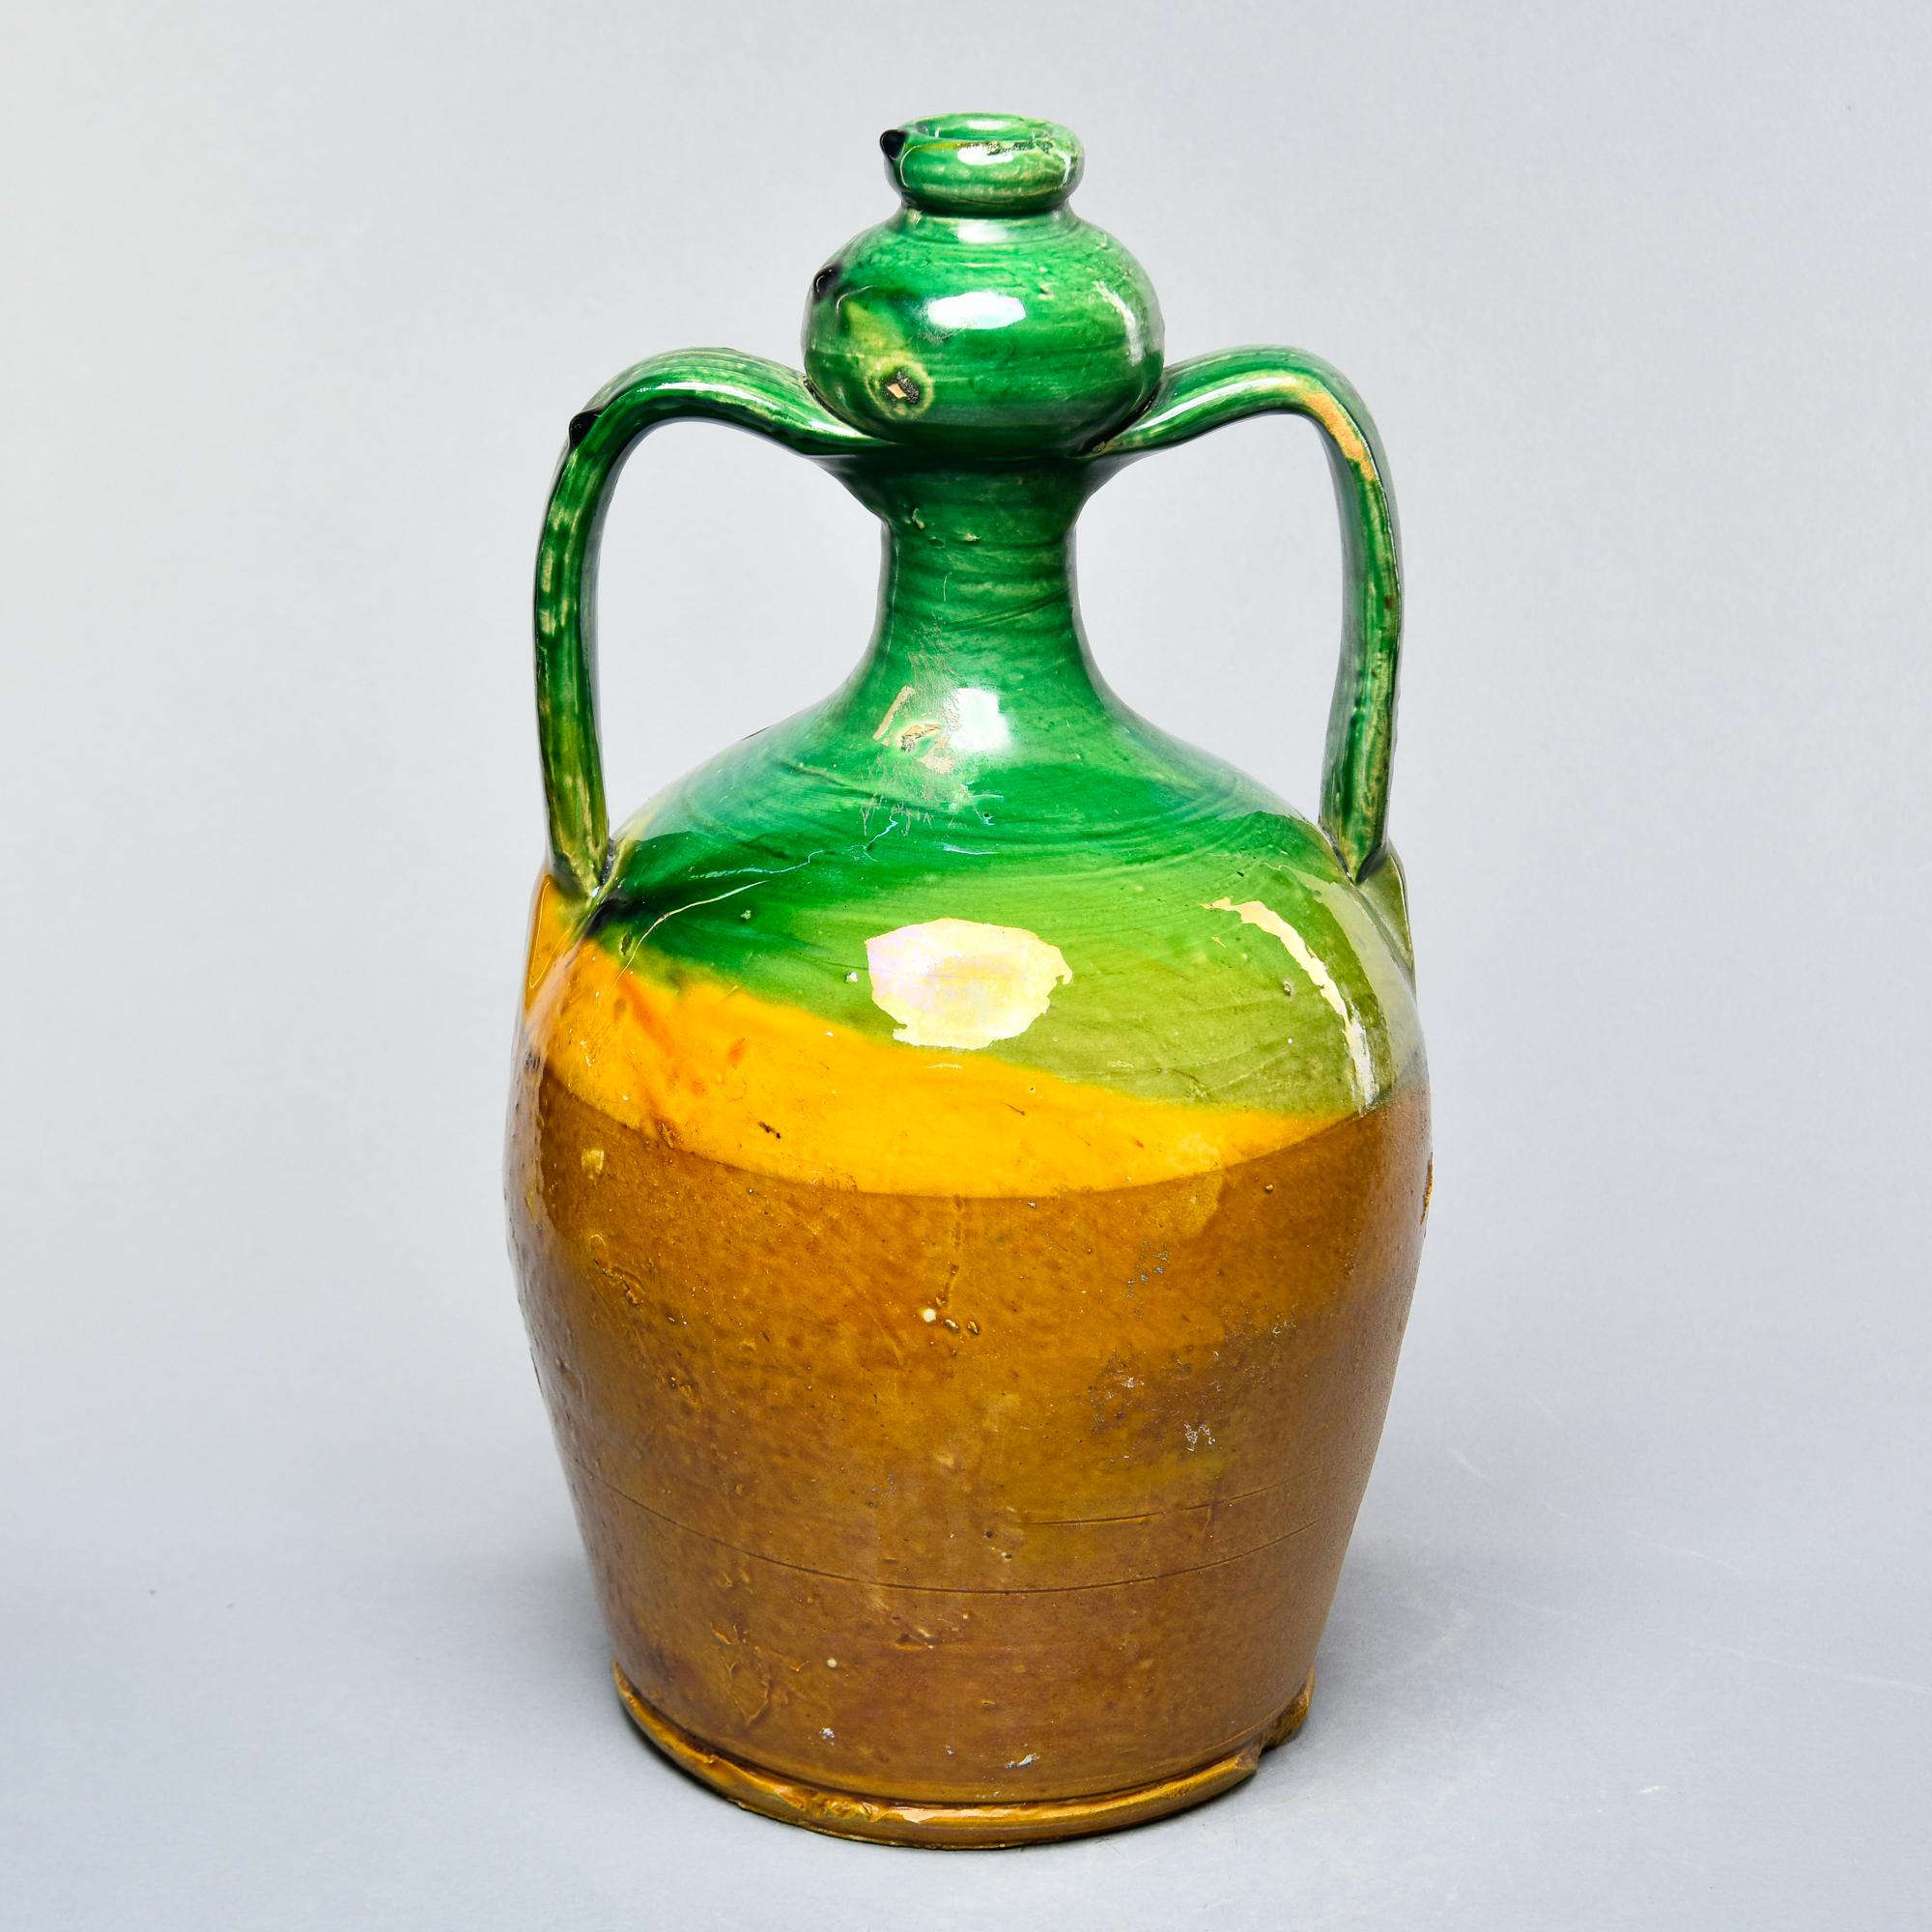 Found in France, this French vase dates from approximately 1910. This piece stands 14.75” high and has a body with 8-1/4” diameter at the base and two shoulder form handles on the sides and a narrow neck. Vessel has a dark mustard-colored glaze on